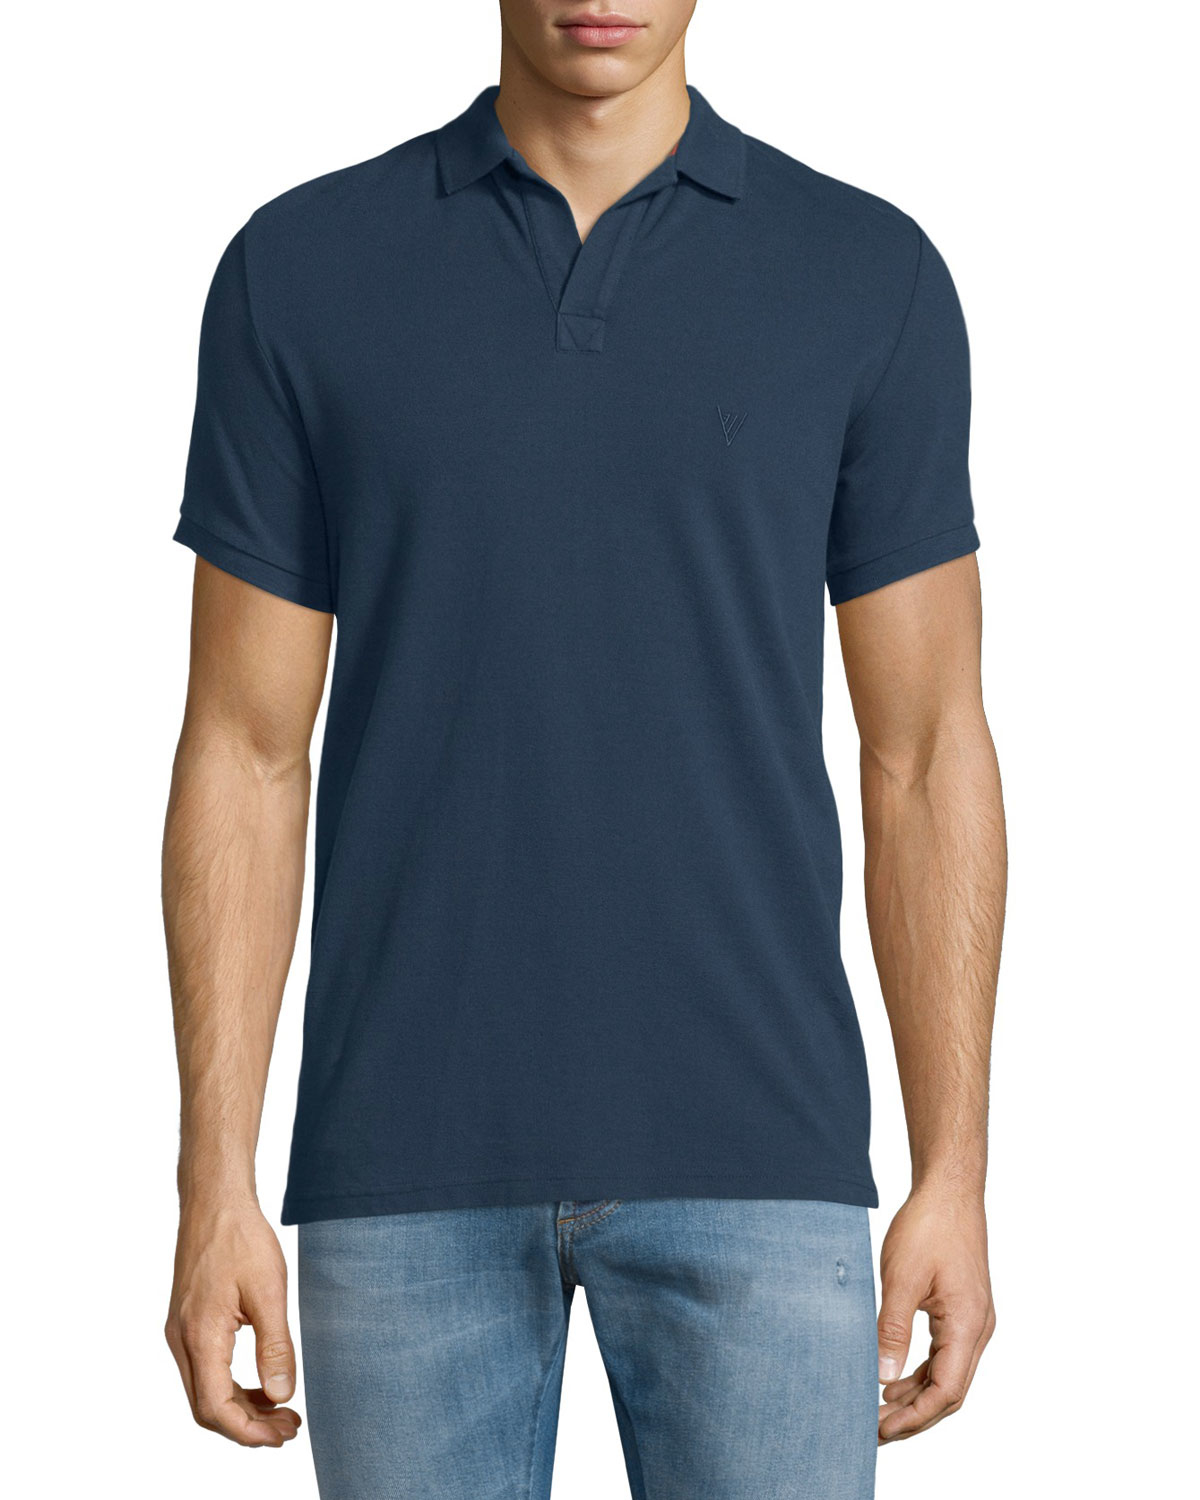 Lyst - Vilebrequin Johnny-collar Pique Polo Shirt in Blue for Men